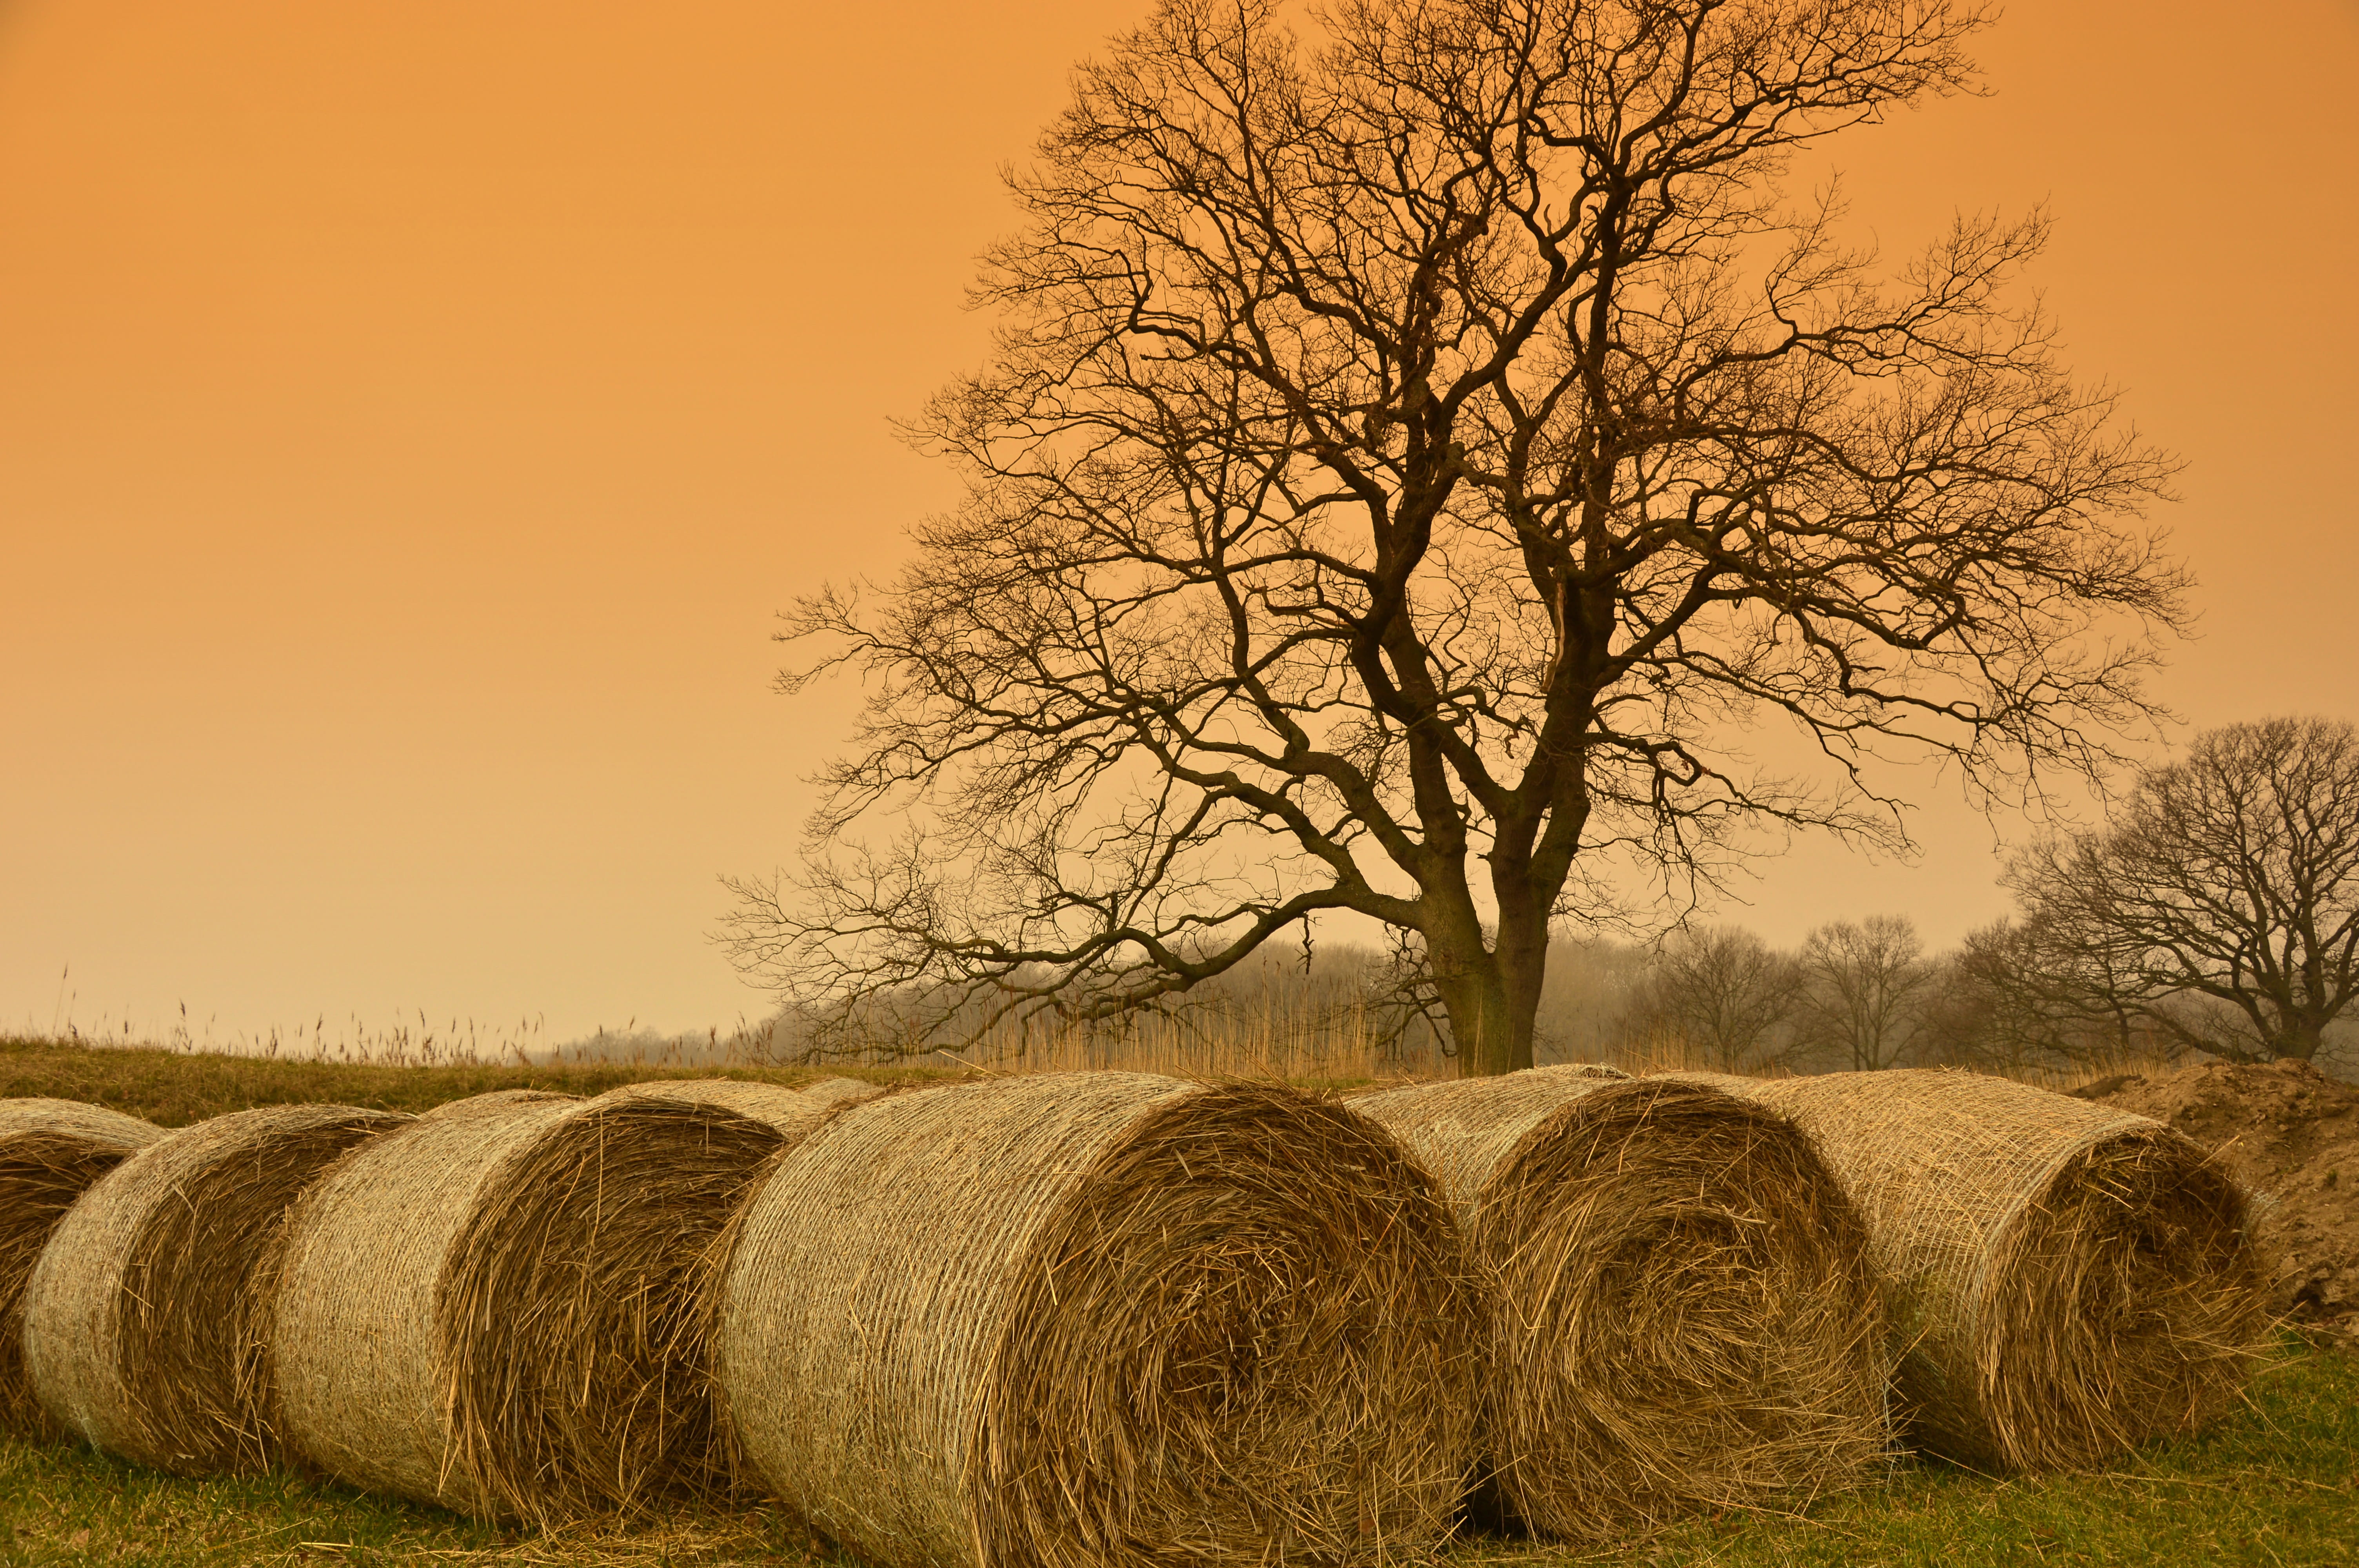 straw bales, hay bales, harvest, agriculture, tree, nature